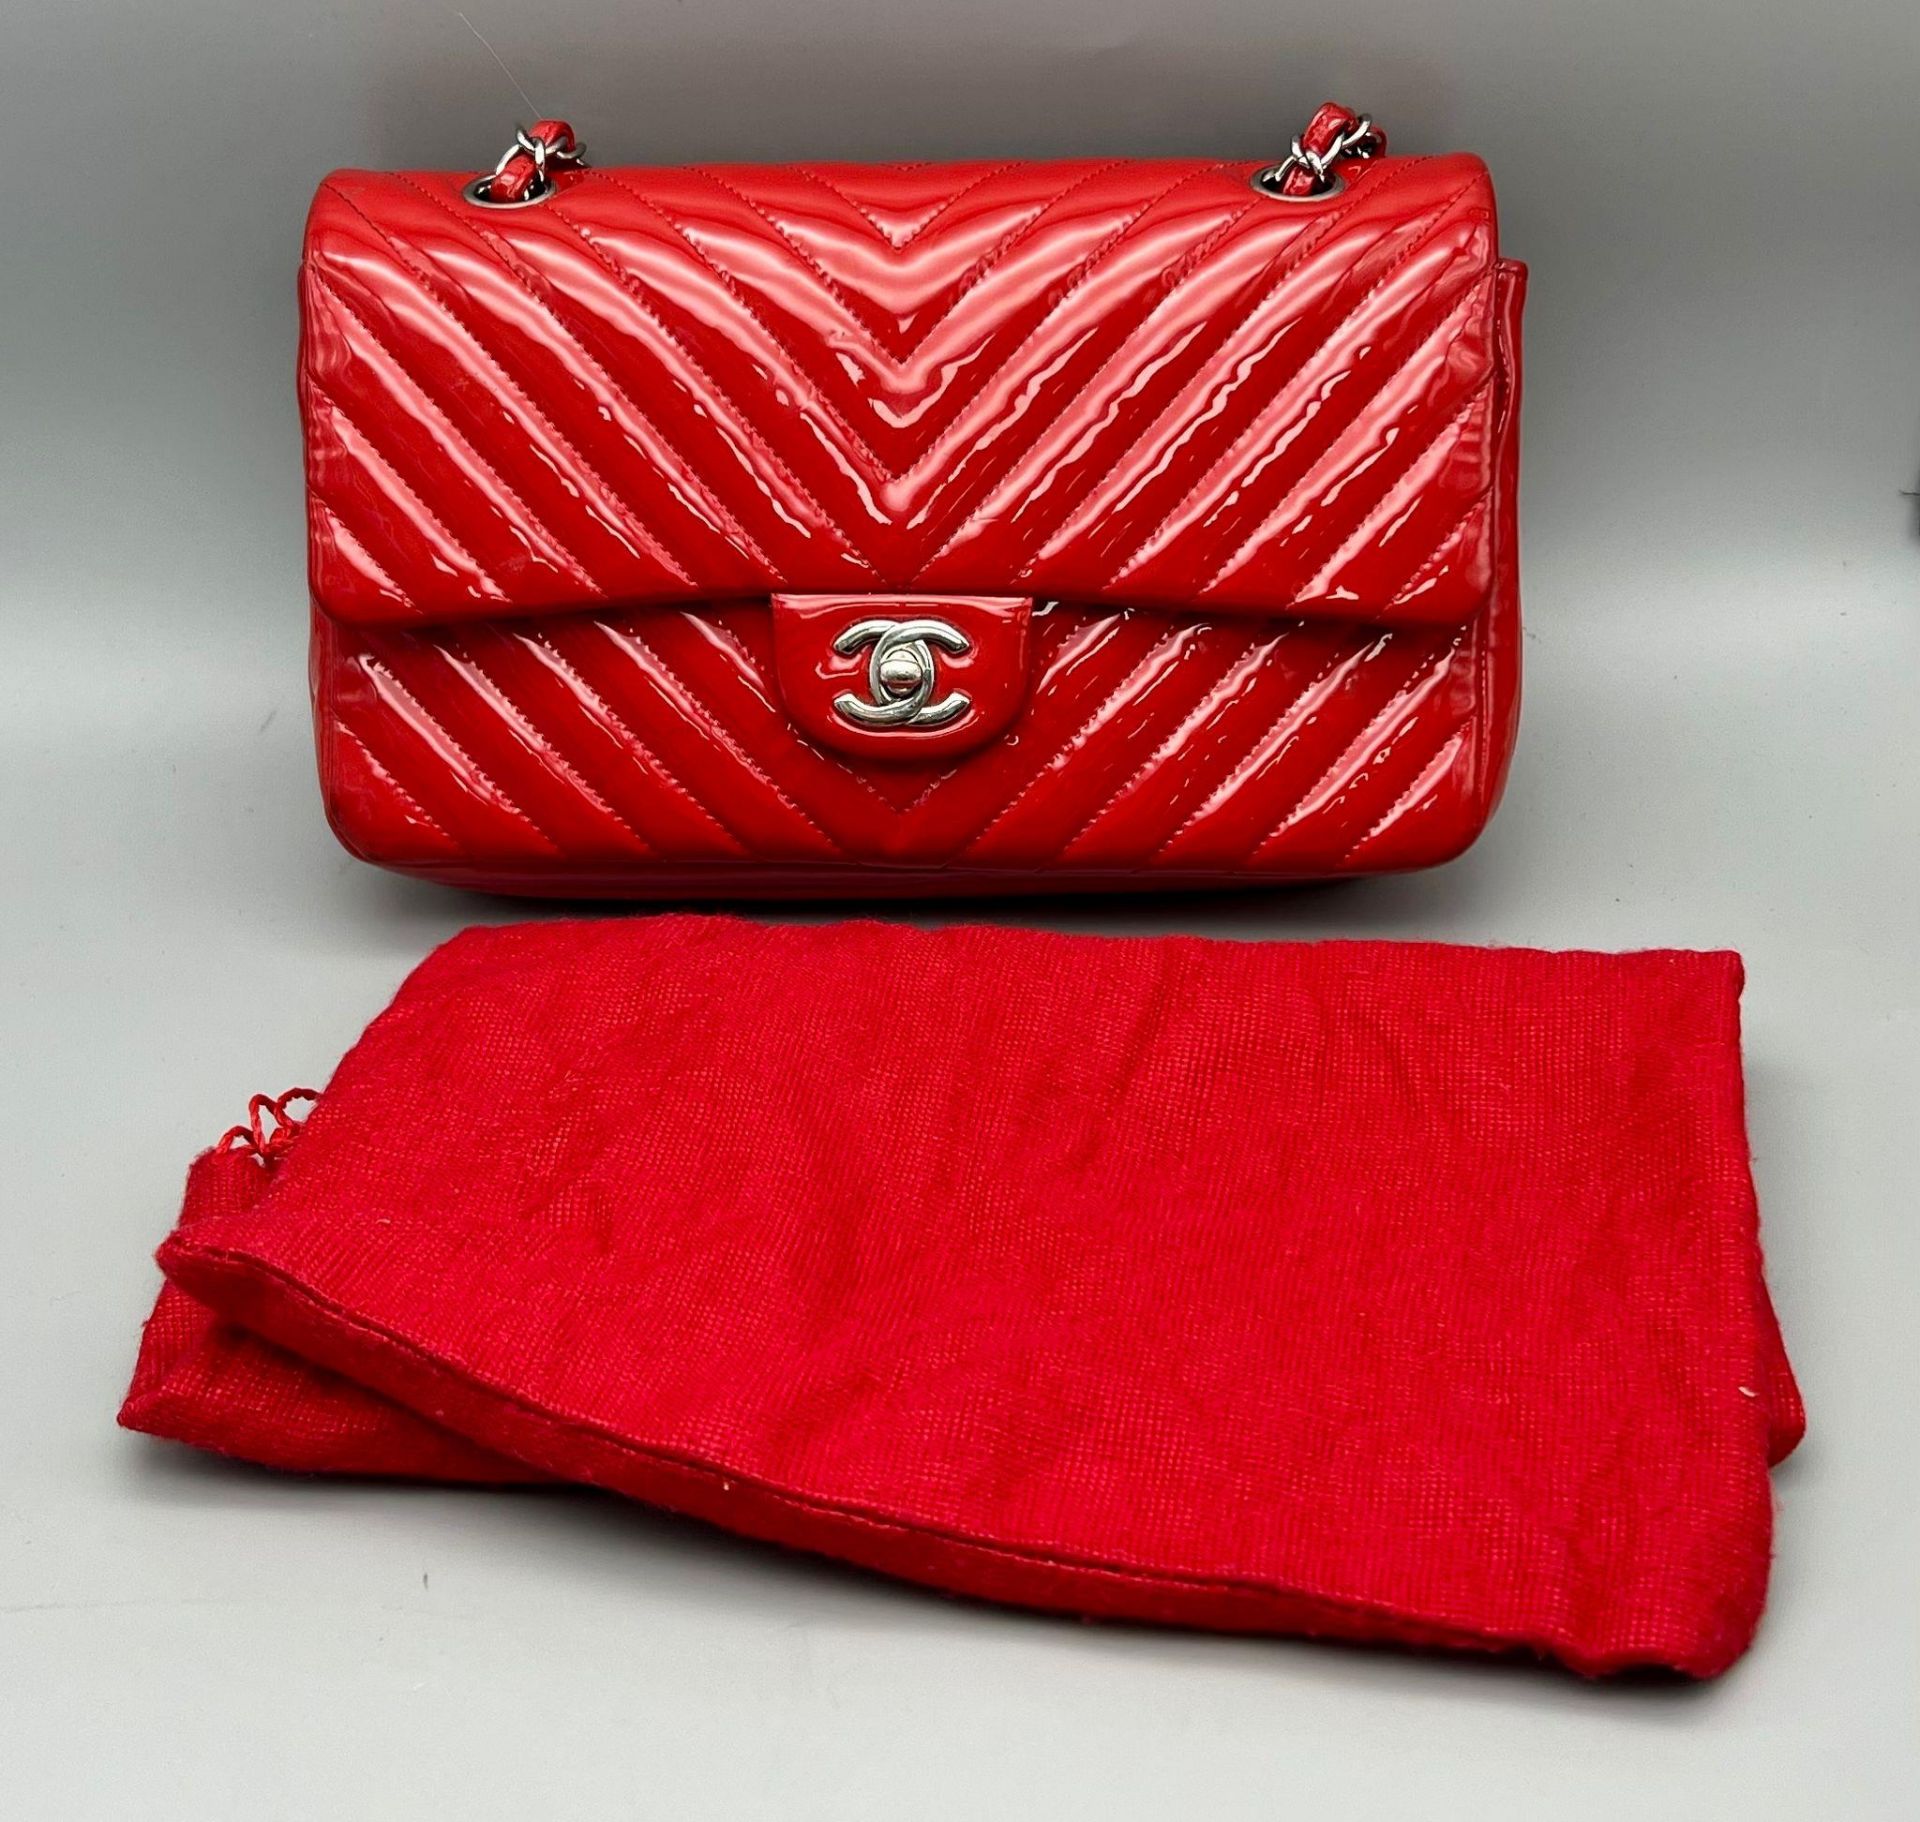 A Chanel Patent Leather Flap Handbag. Bright red patent leather quilted exterior. Classic Chanel - Bild 7 aus 7